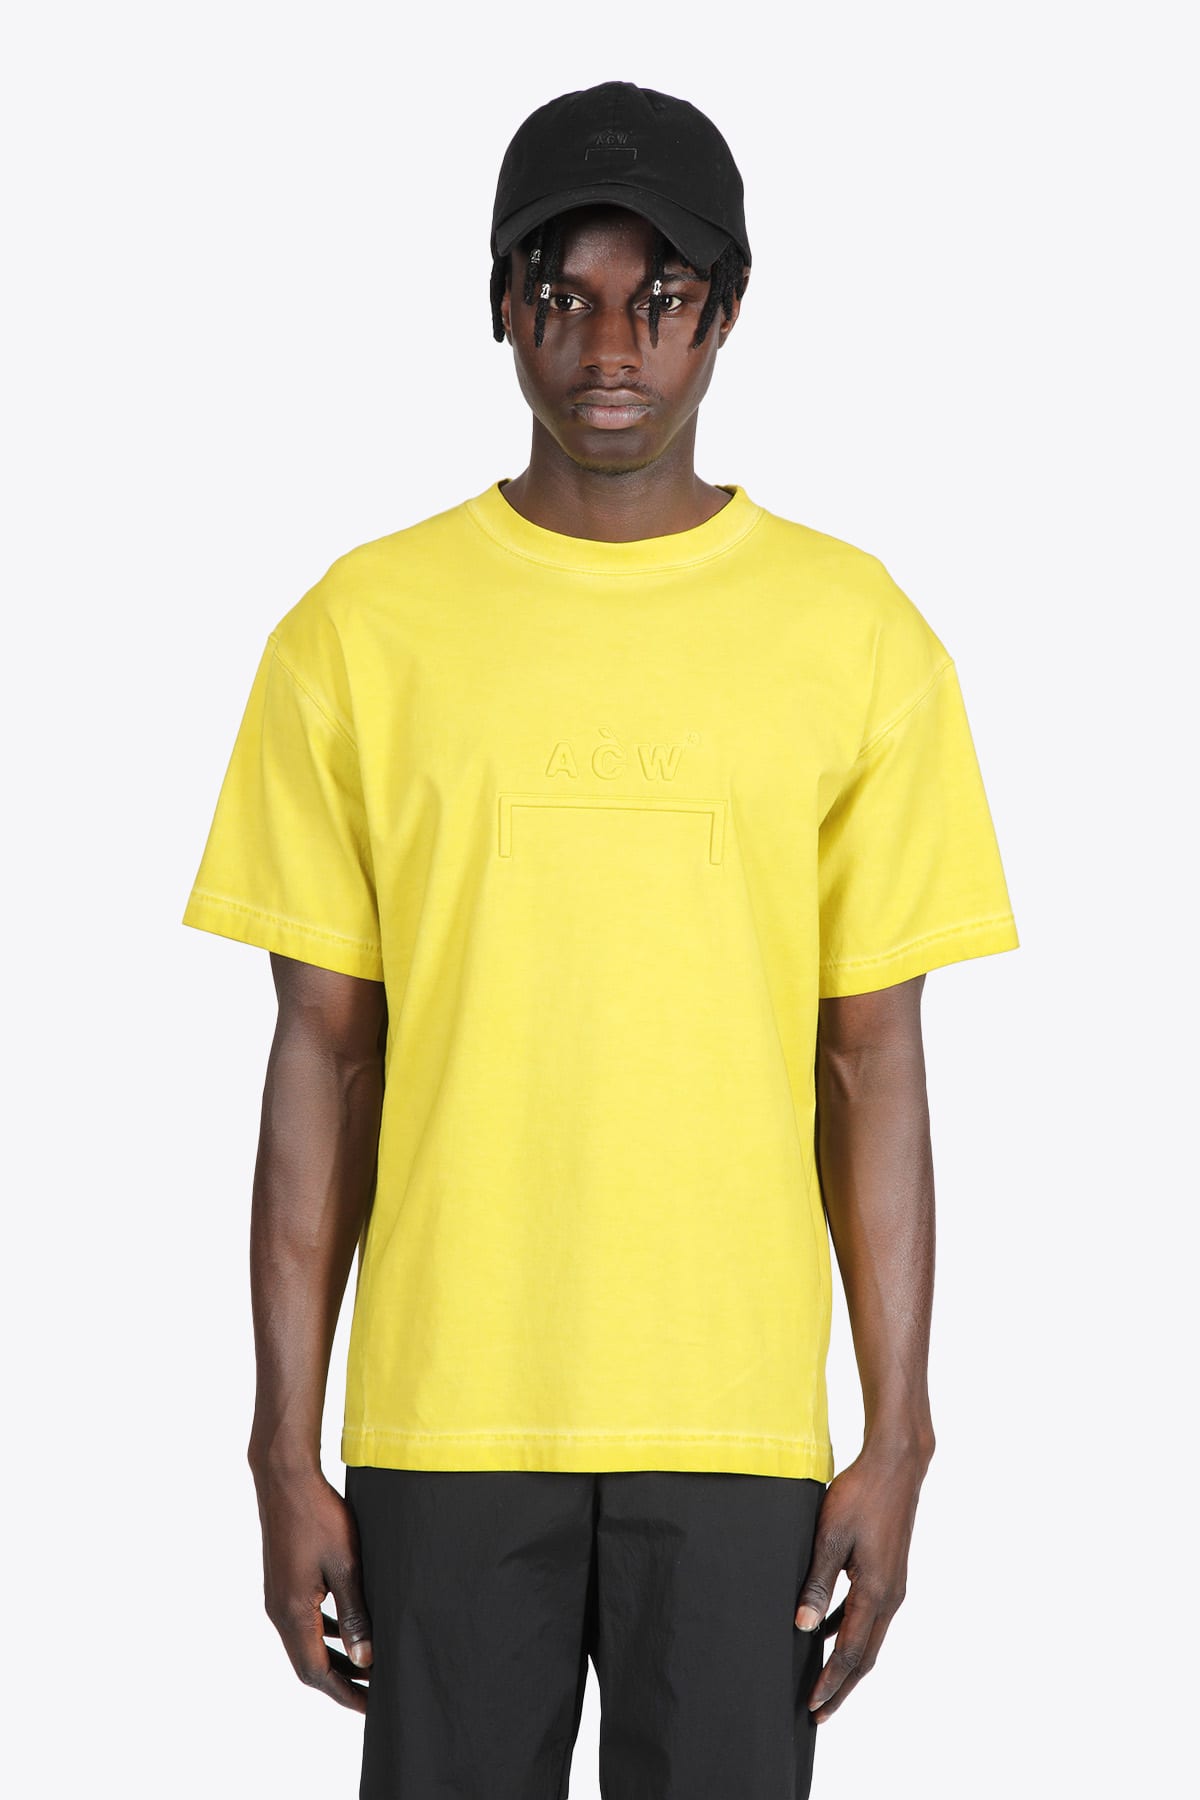 A-COLD-WALL Knitted Dissolve Dye T-shirt Pistacho dyed cotton t-shirt with embossed logo